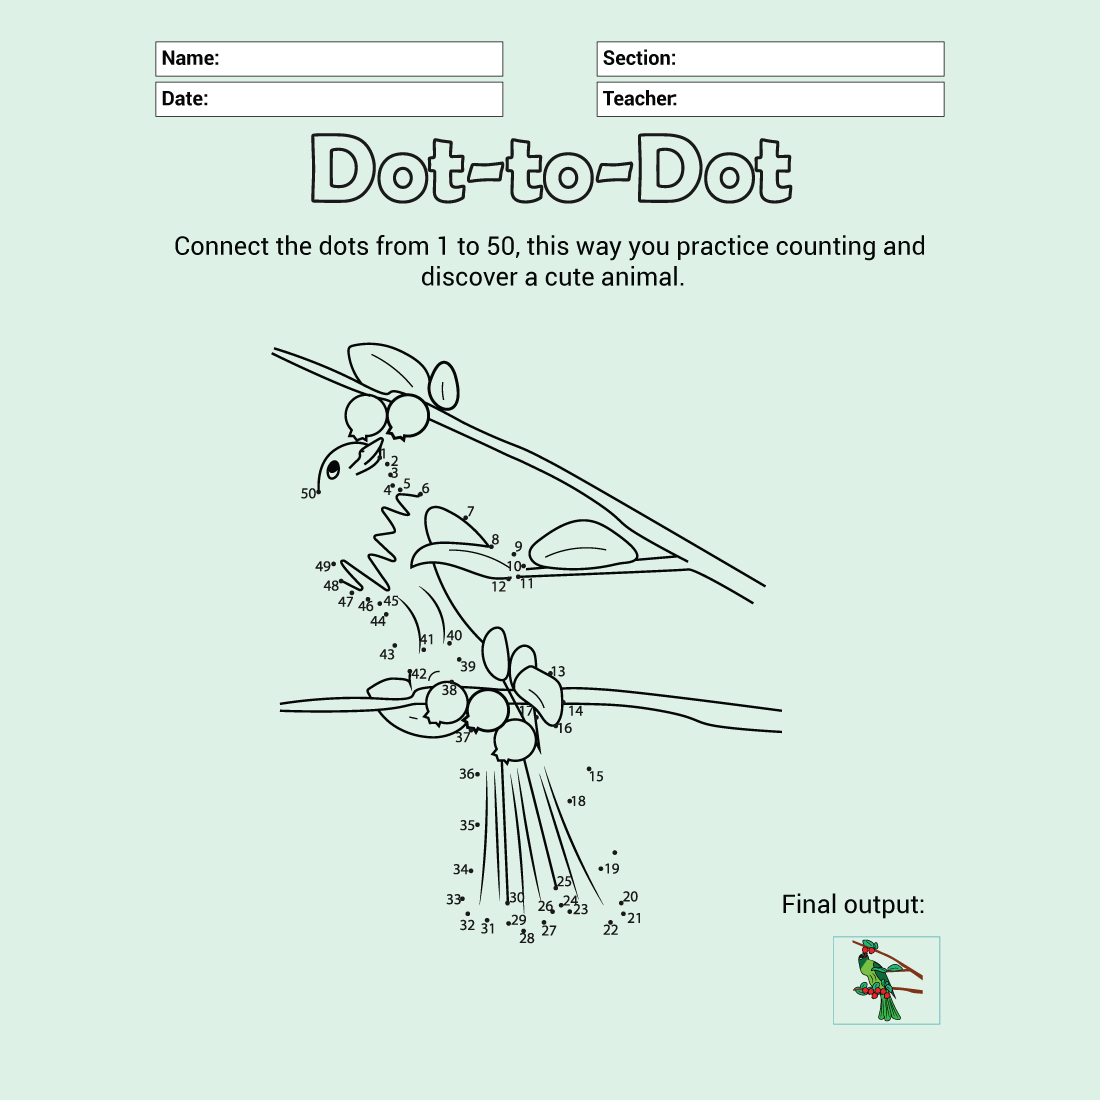 Parrot Connecting Dots cover image.